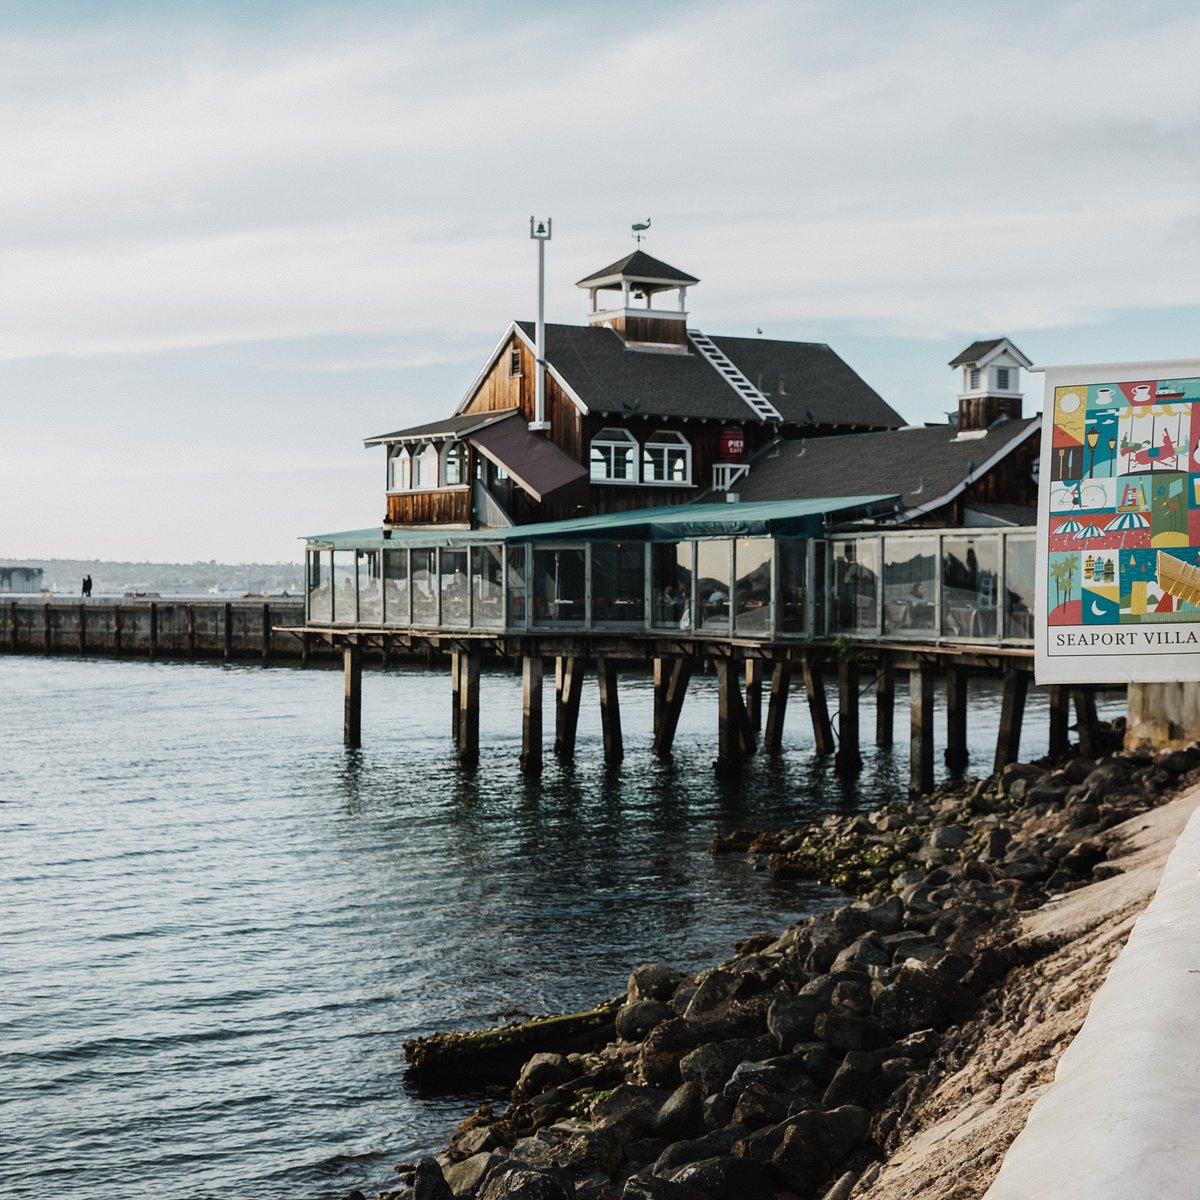 San Diego's Seaport Village: Exploring The Marina District and